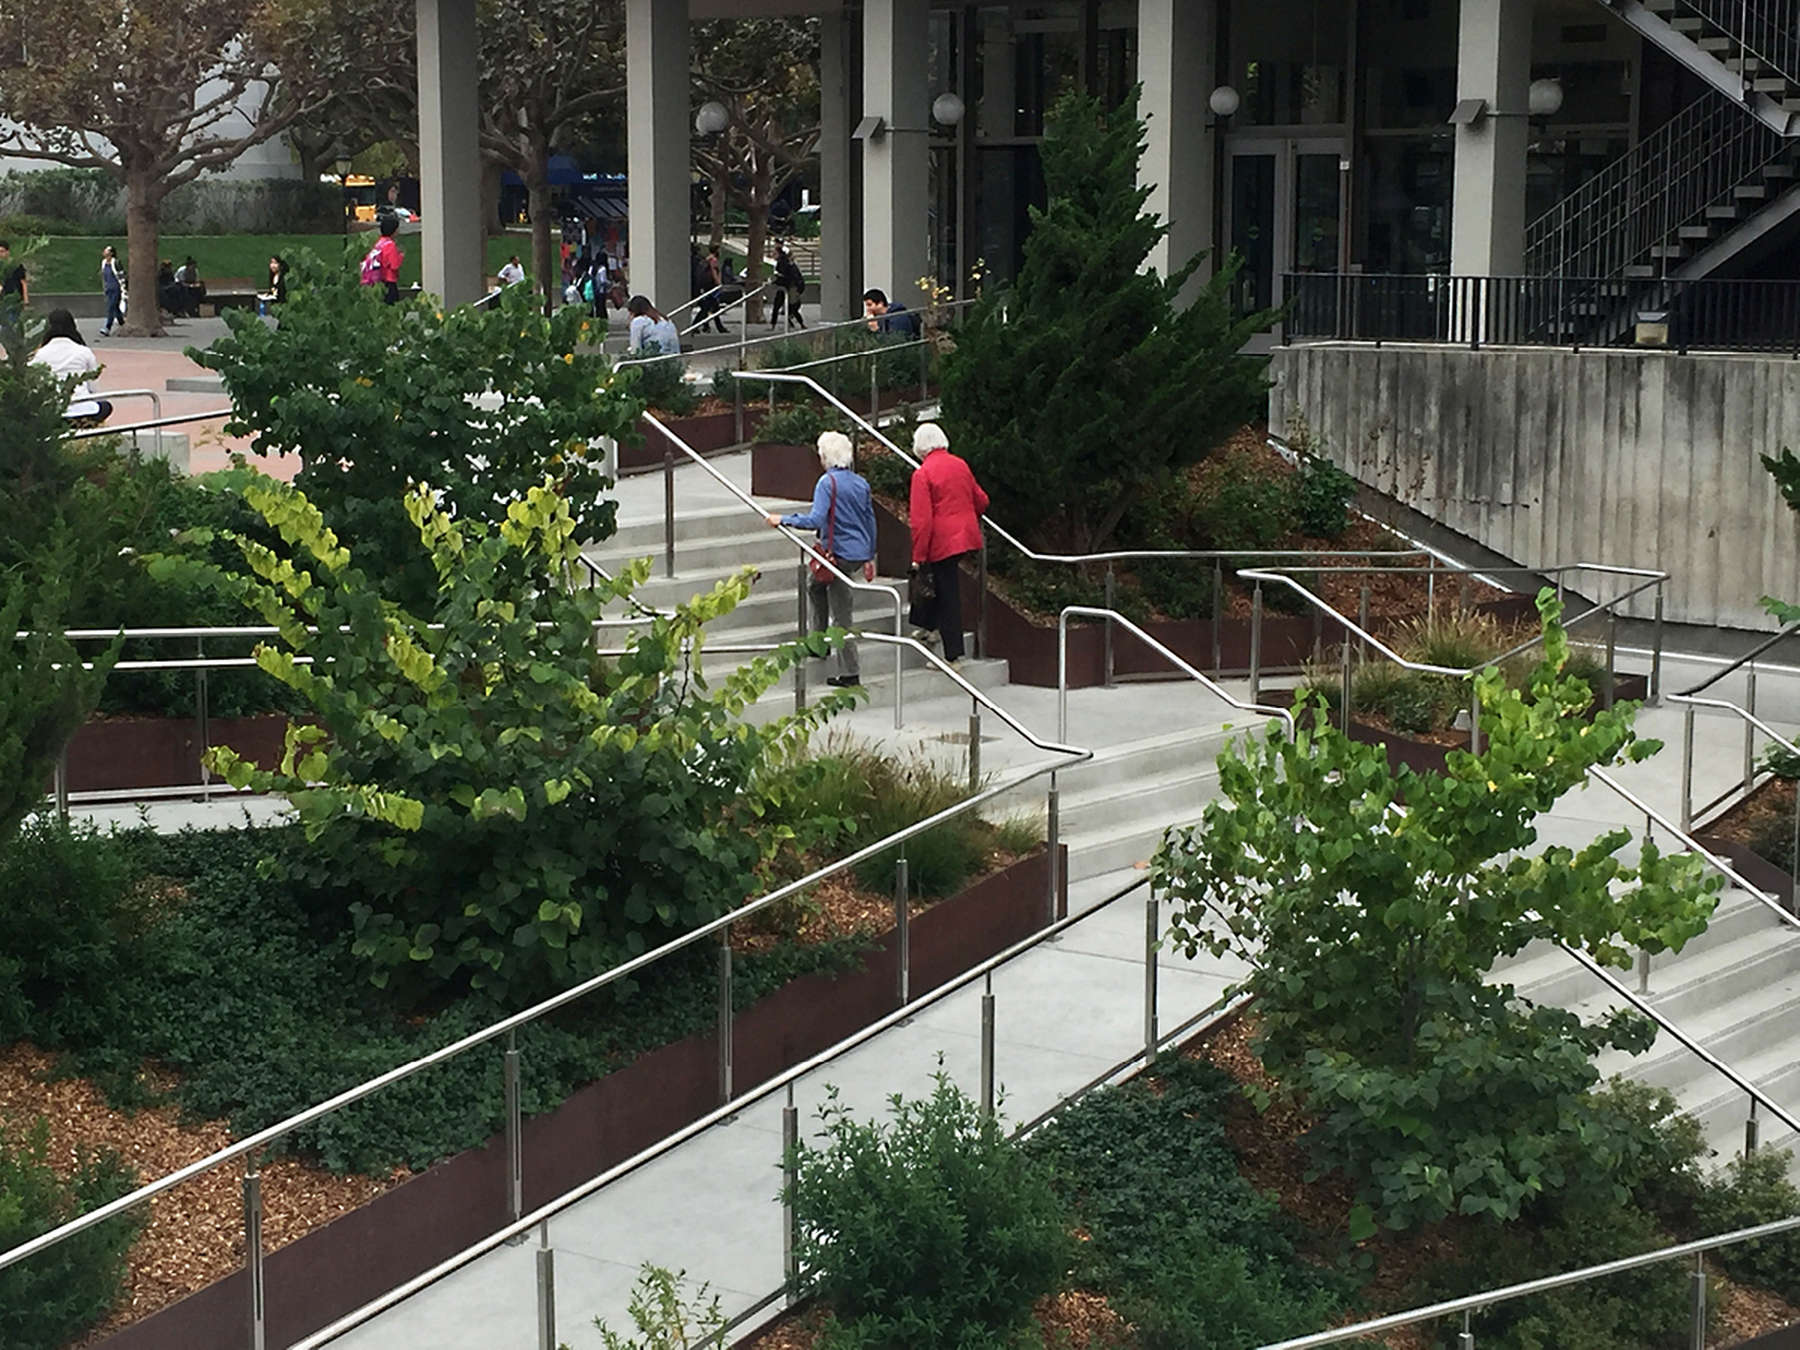 Students at UC Berkeley levied a self-imposed fee to redesign the new student union building and plaza at the Lower Sproul which includes a large rain garden and cistern to irrigate the landscape. 